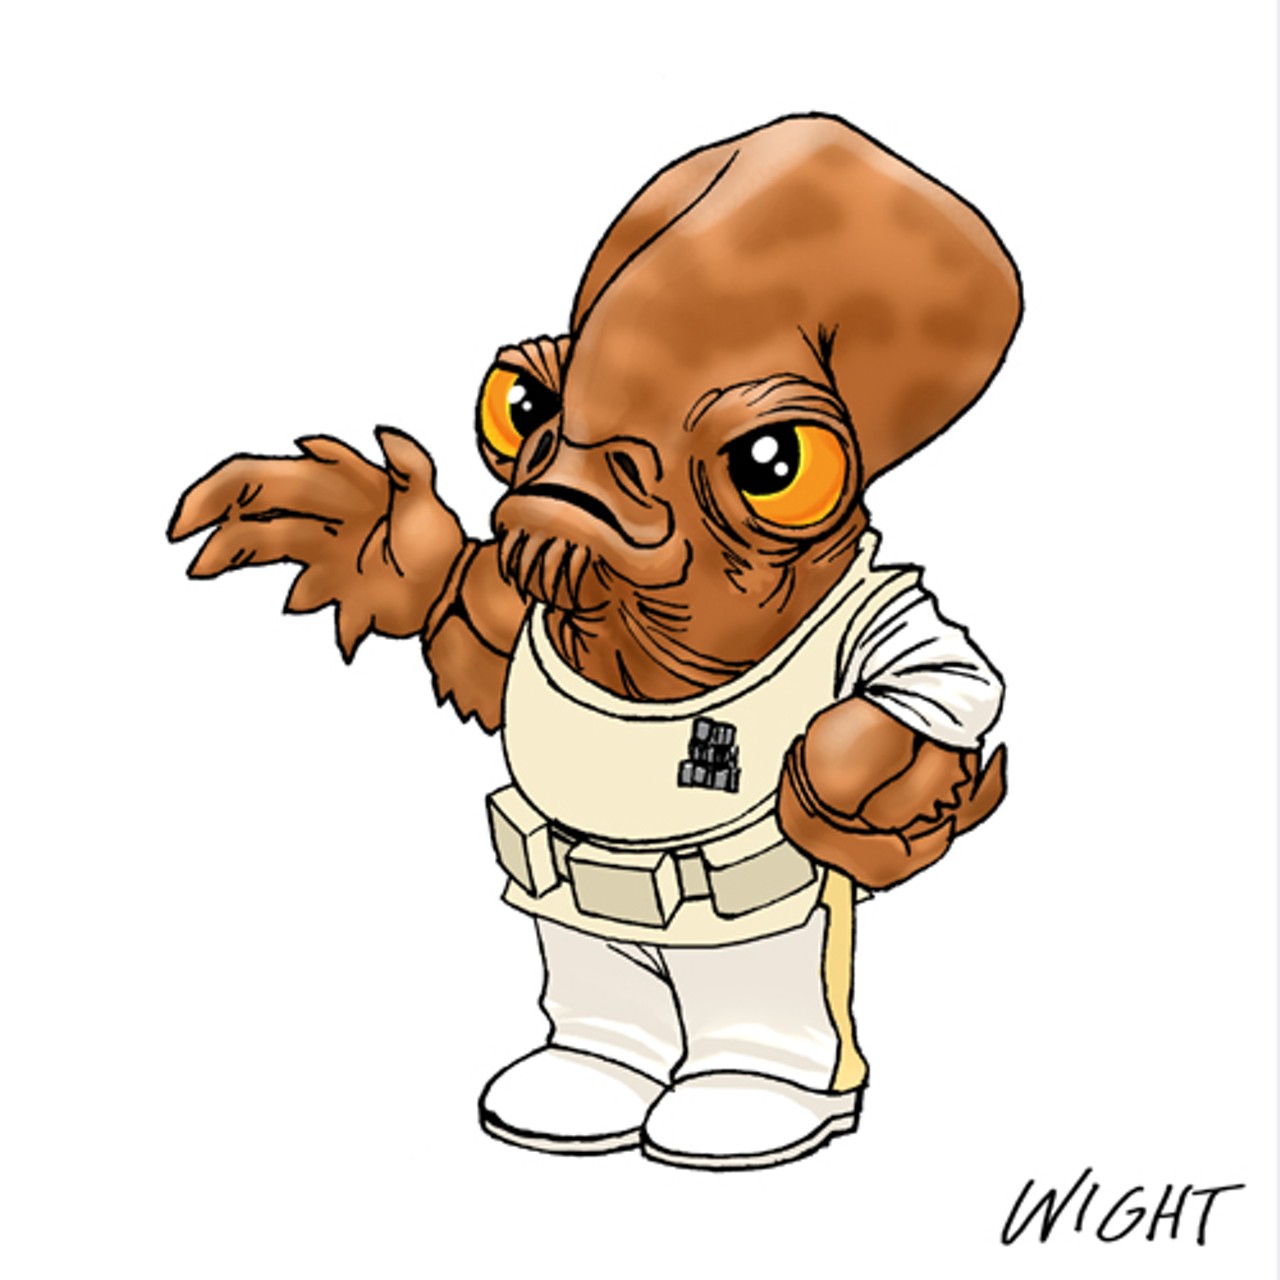 "A Is For Ackbar"</h1]